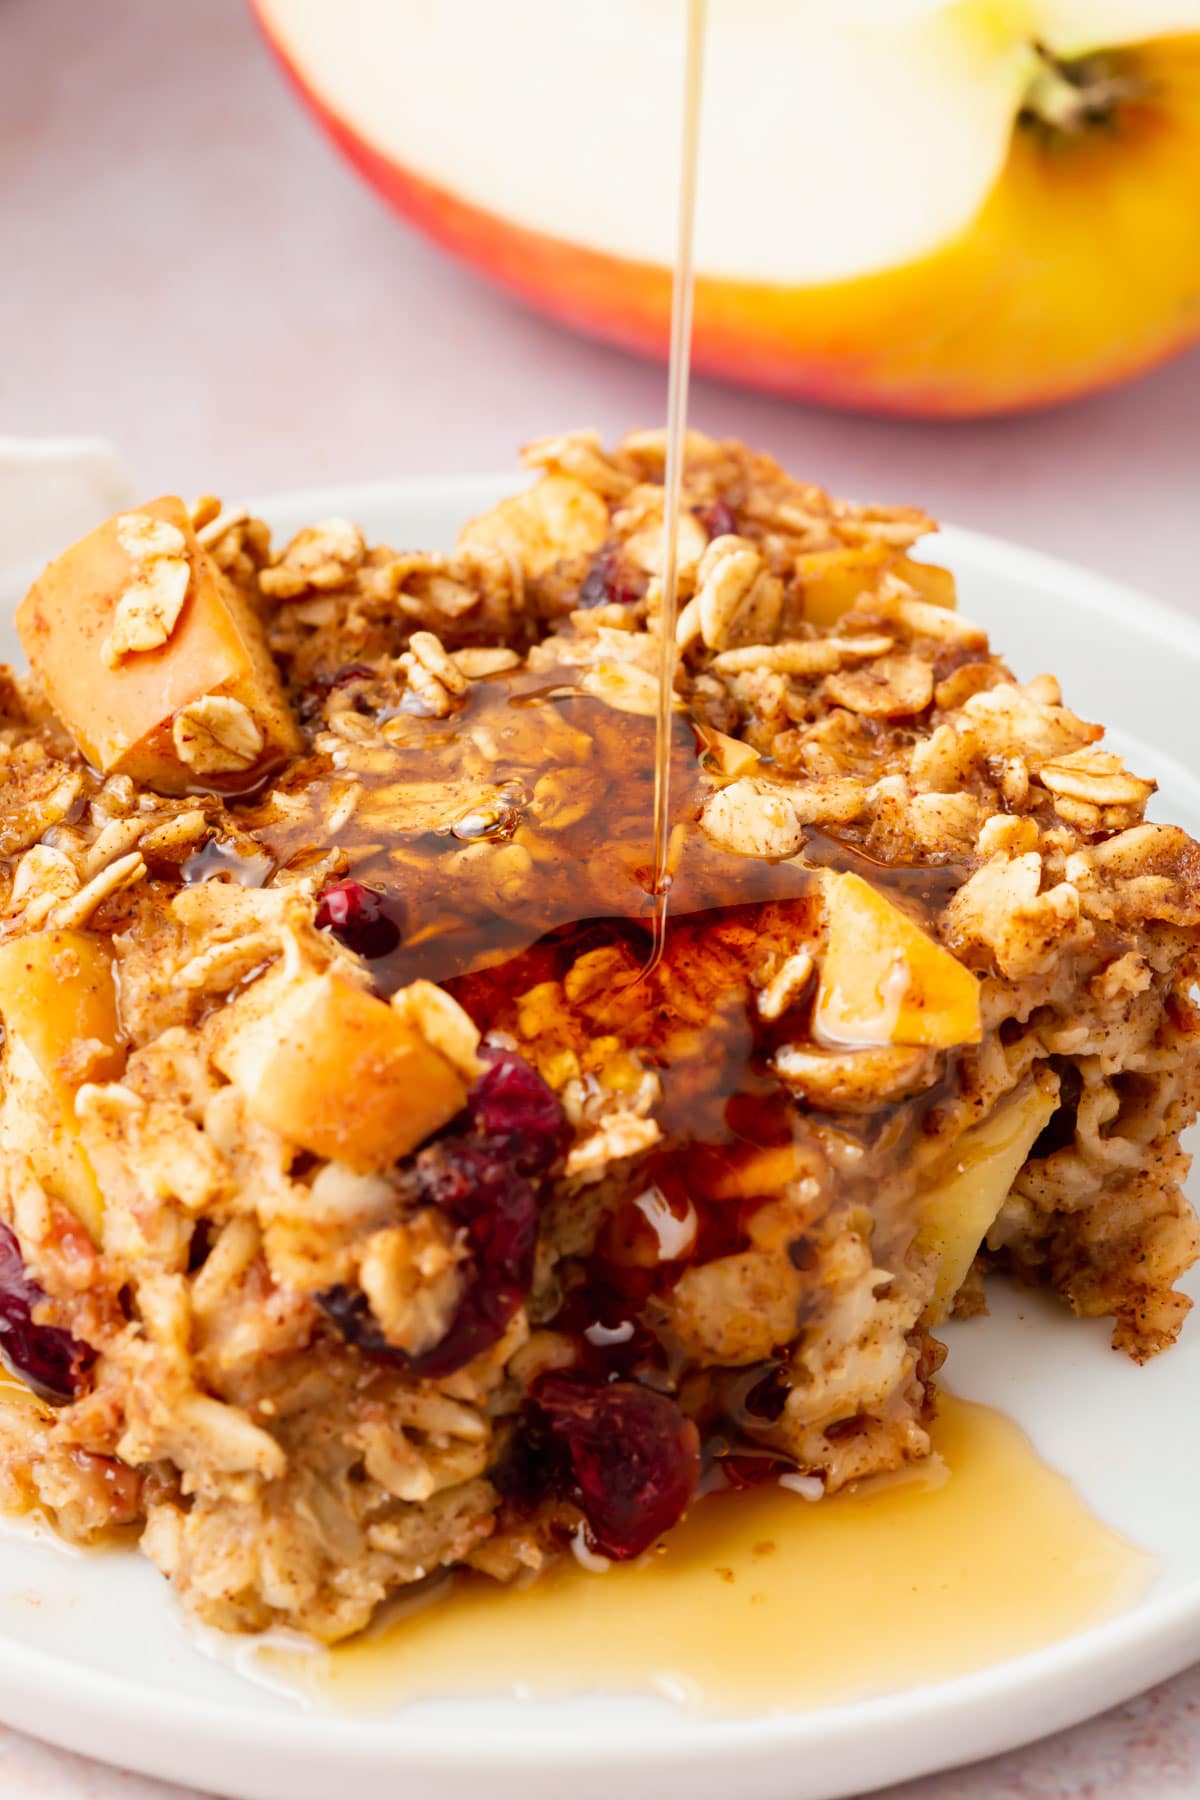 A close-up of a square of gluten-free vegan apple baked oatmeal on a plate drizzled with honey.